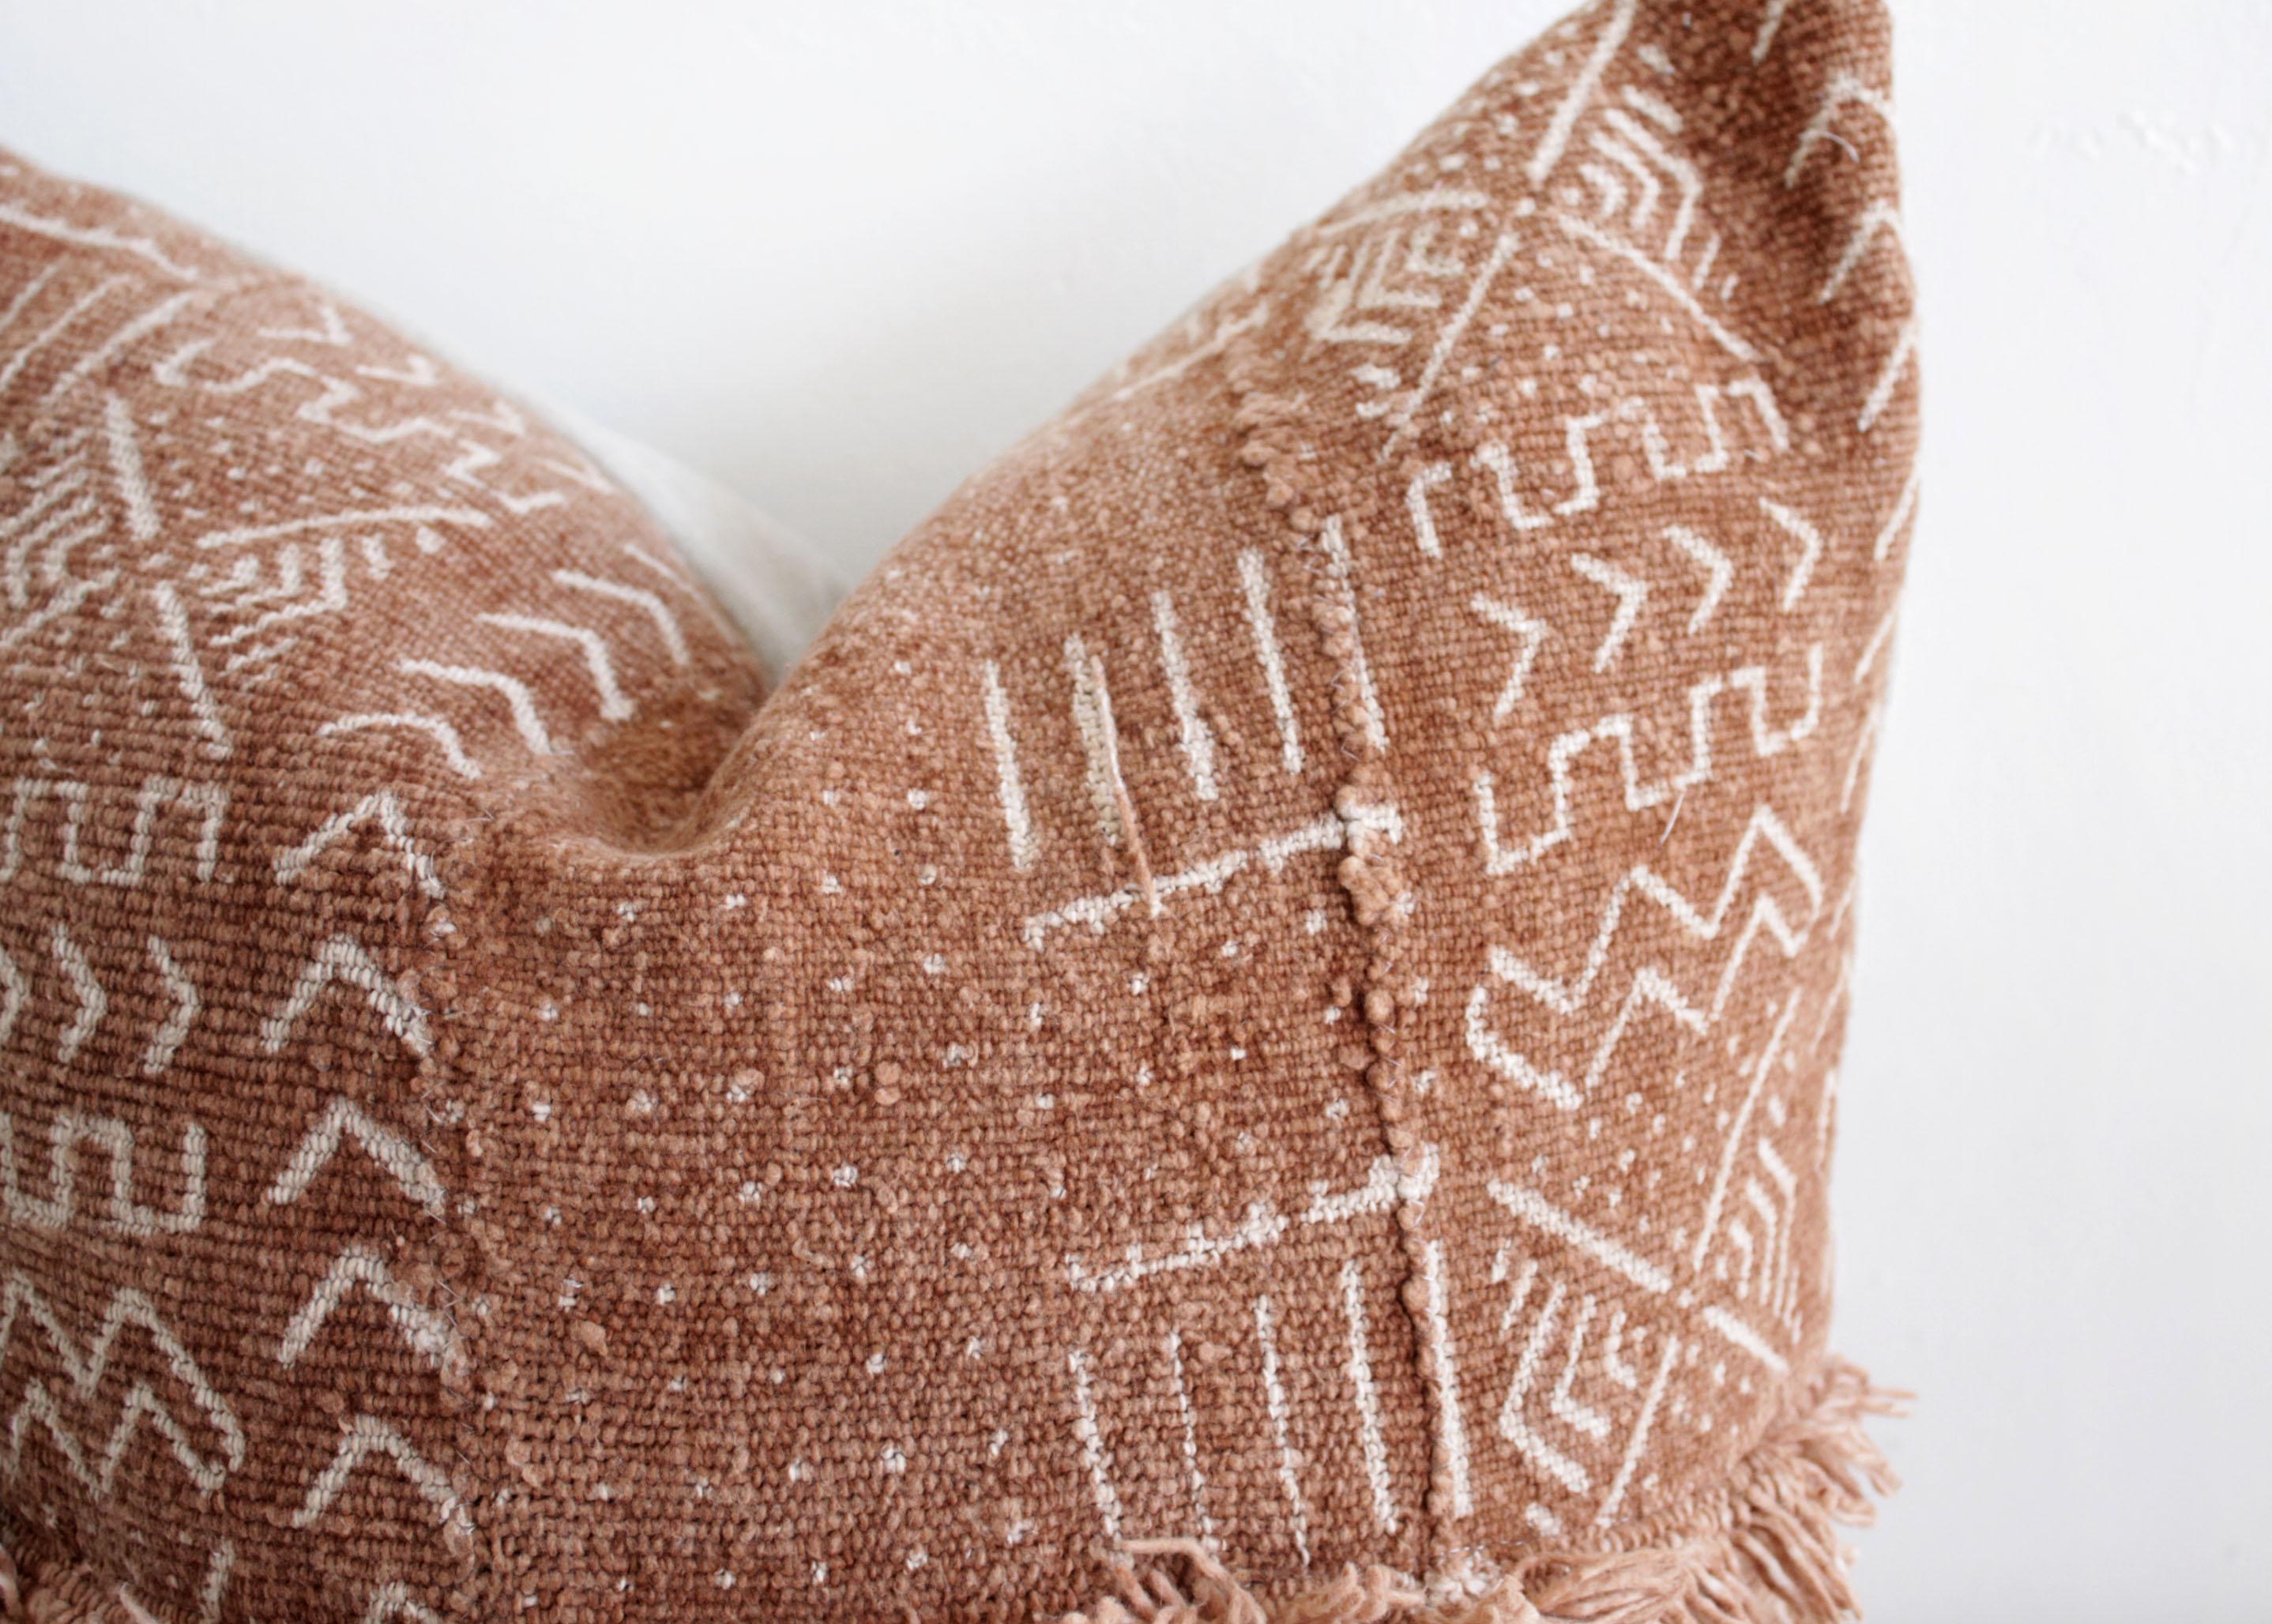 Vintage African Mudcloth pillows with original fringe details A deep burnt orange rust color, with off white arrow pattern, and features original fringe details from the original material. Sewn with a zipper closure, and natural linen backing. The